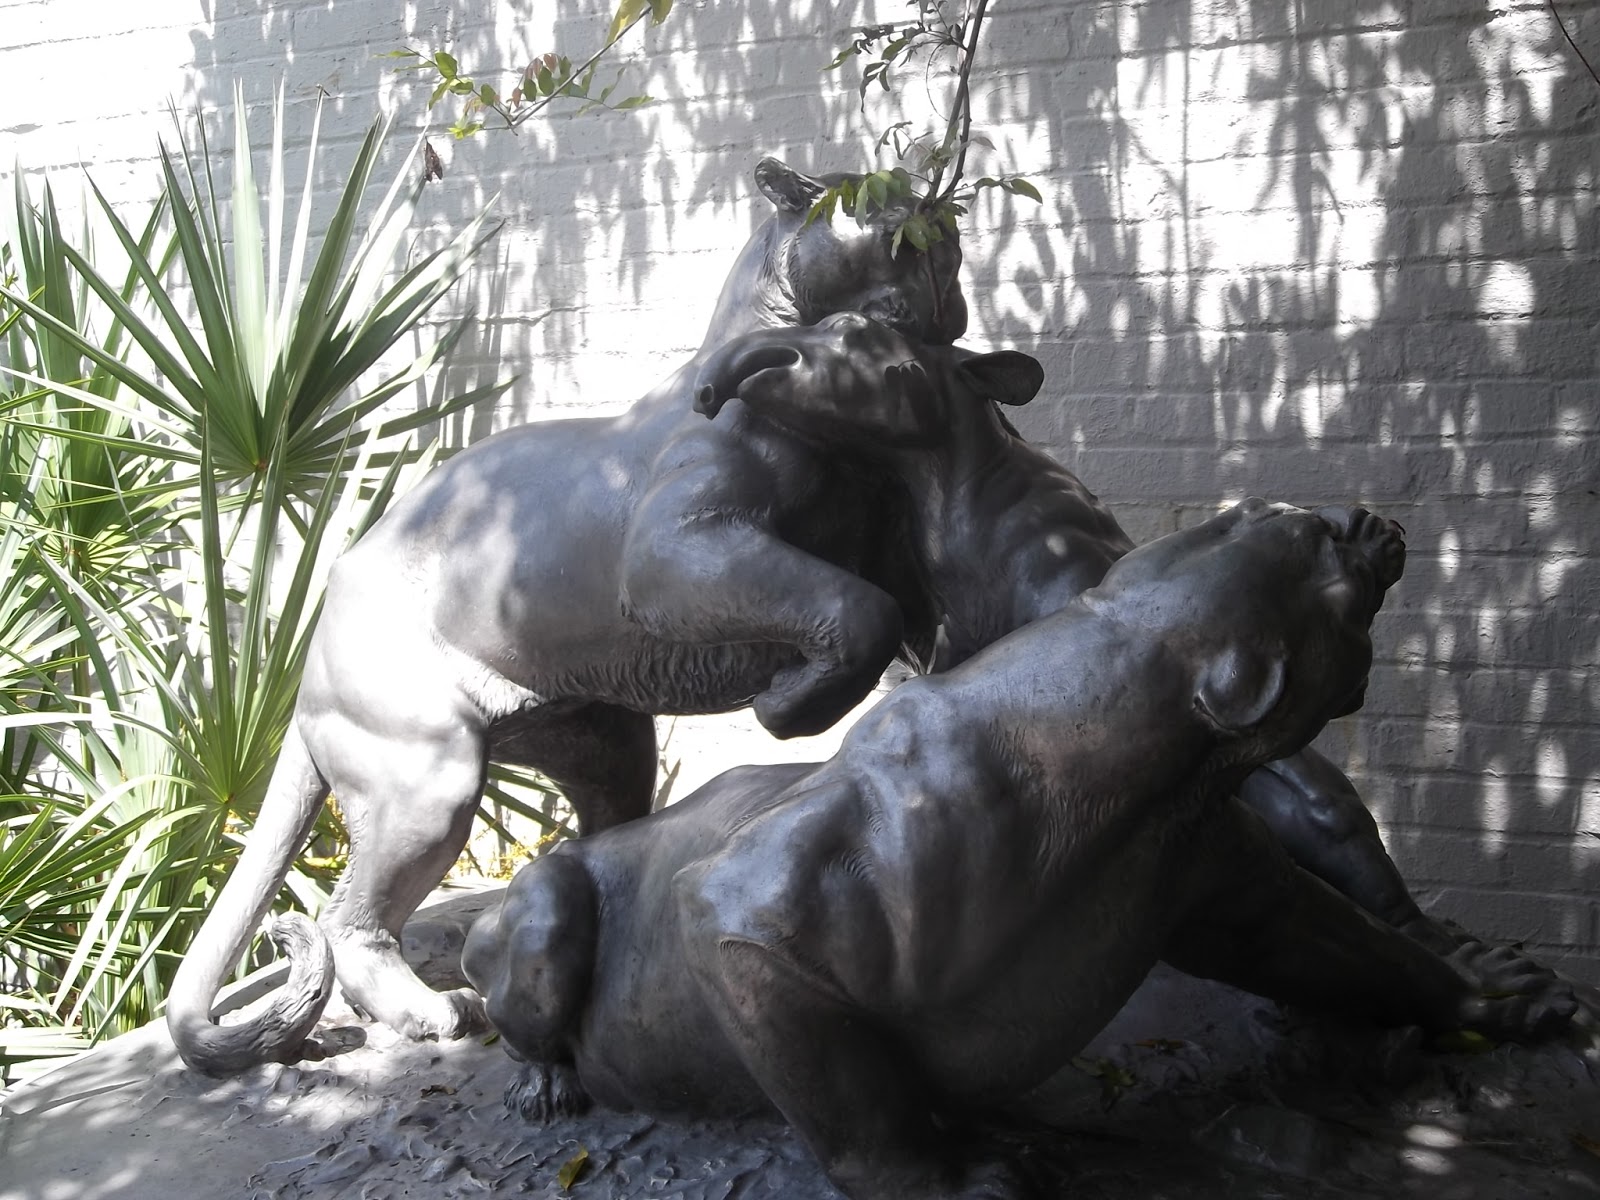 The Natural World: The Animal Statues of Brookgreen Gardens